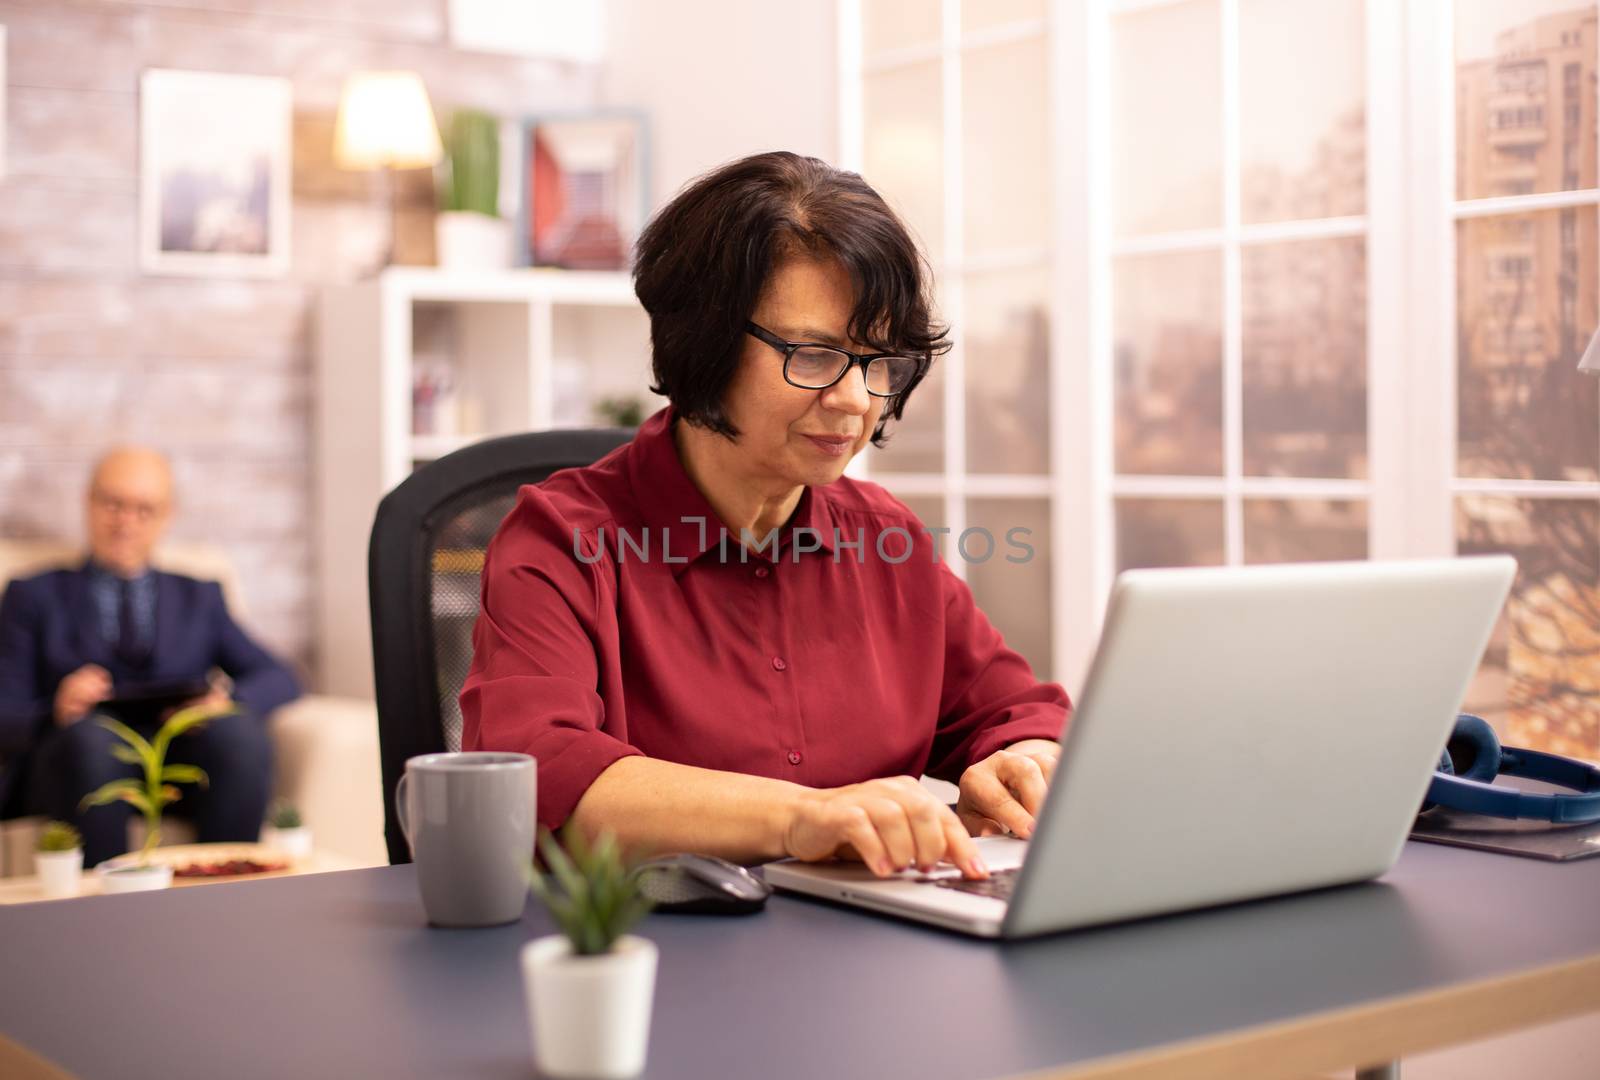 Old woman in her 60s using a modern laptop in her cozy house late in the evening